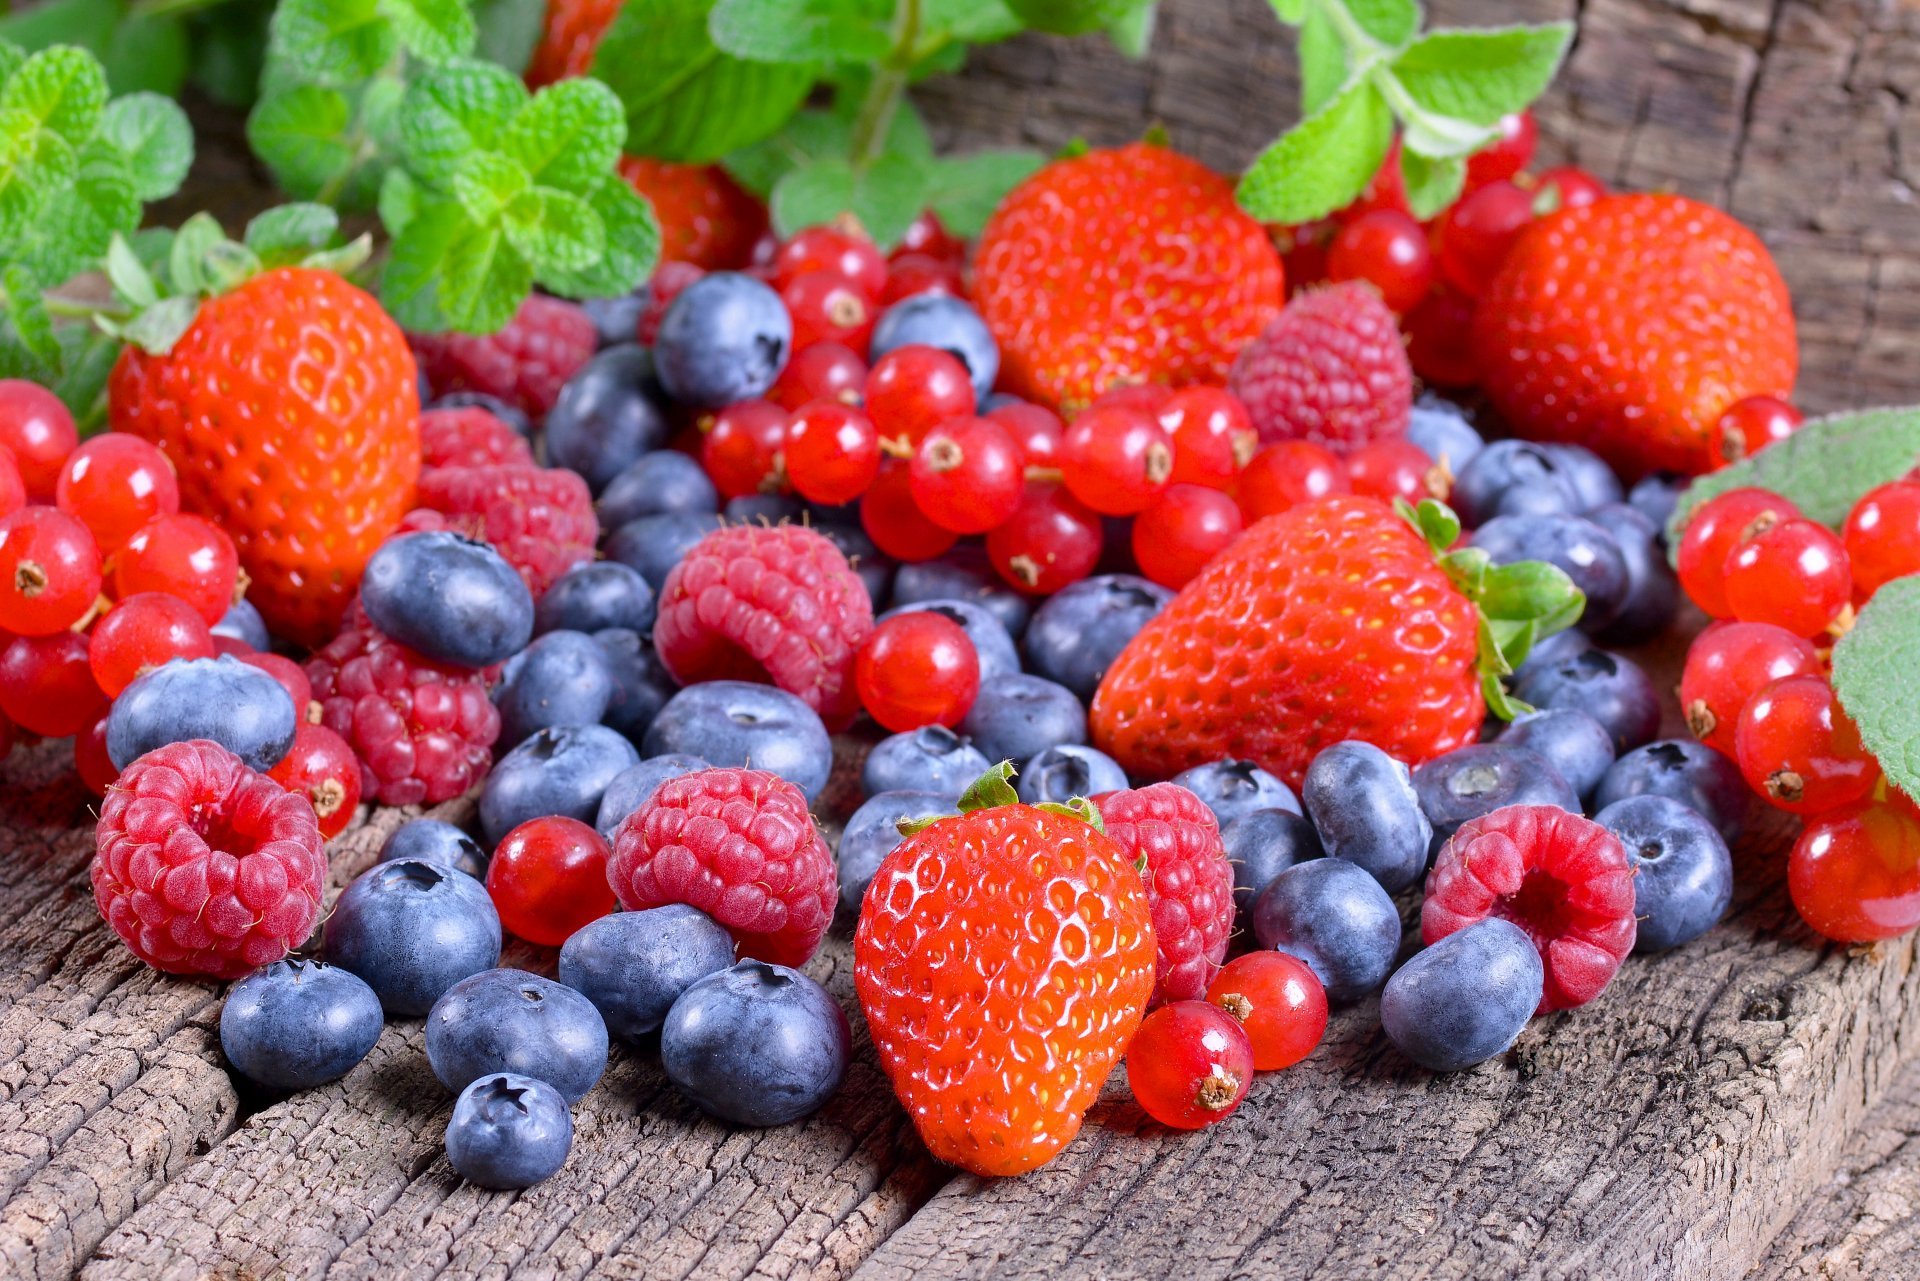 A nutritionist explains which berries you can eat if you have diabetes